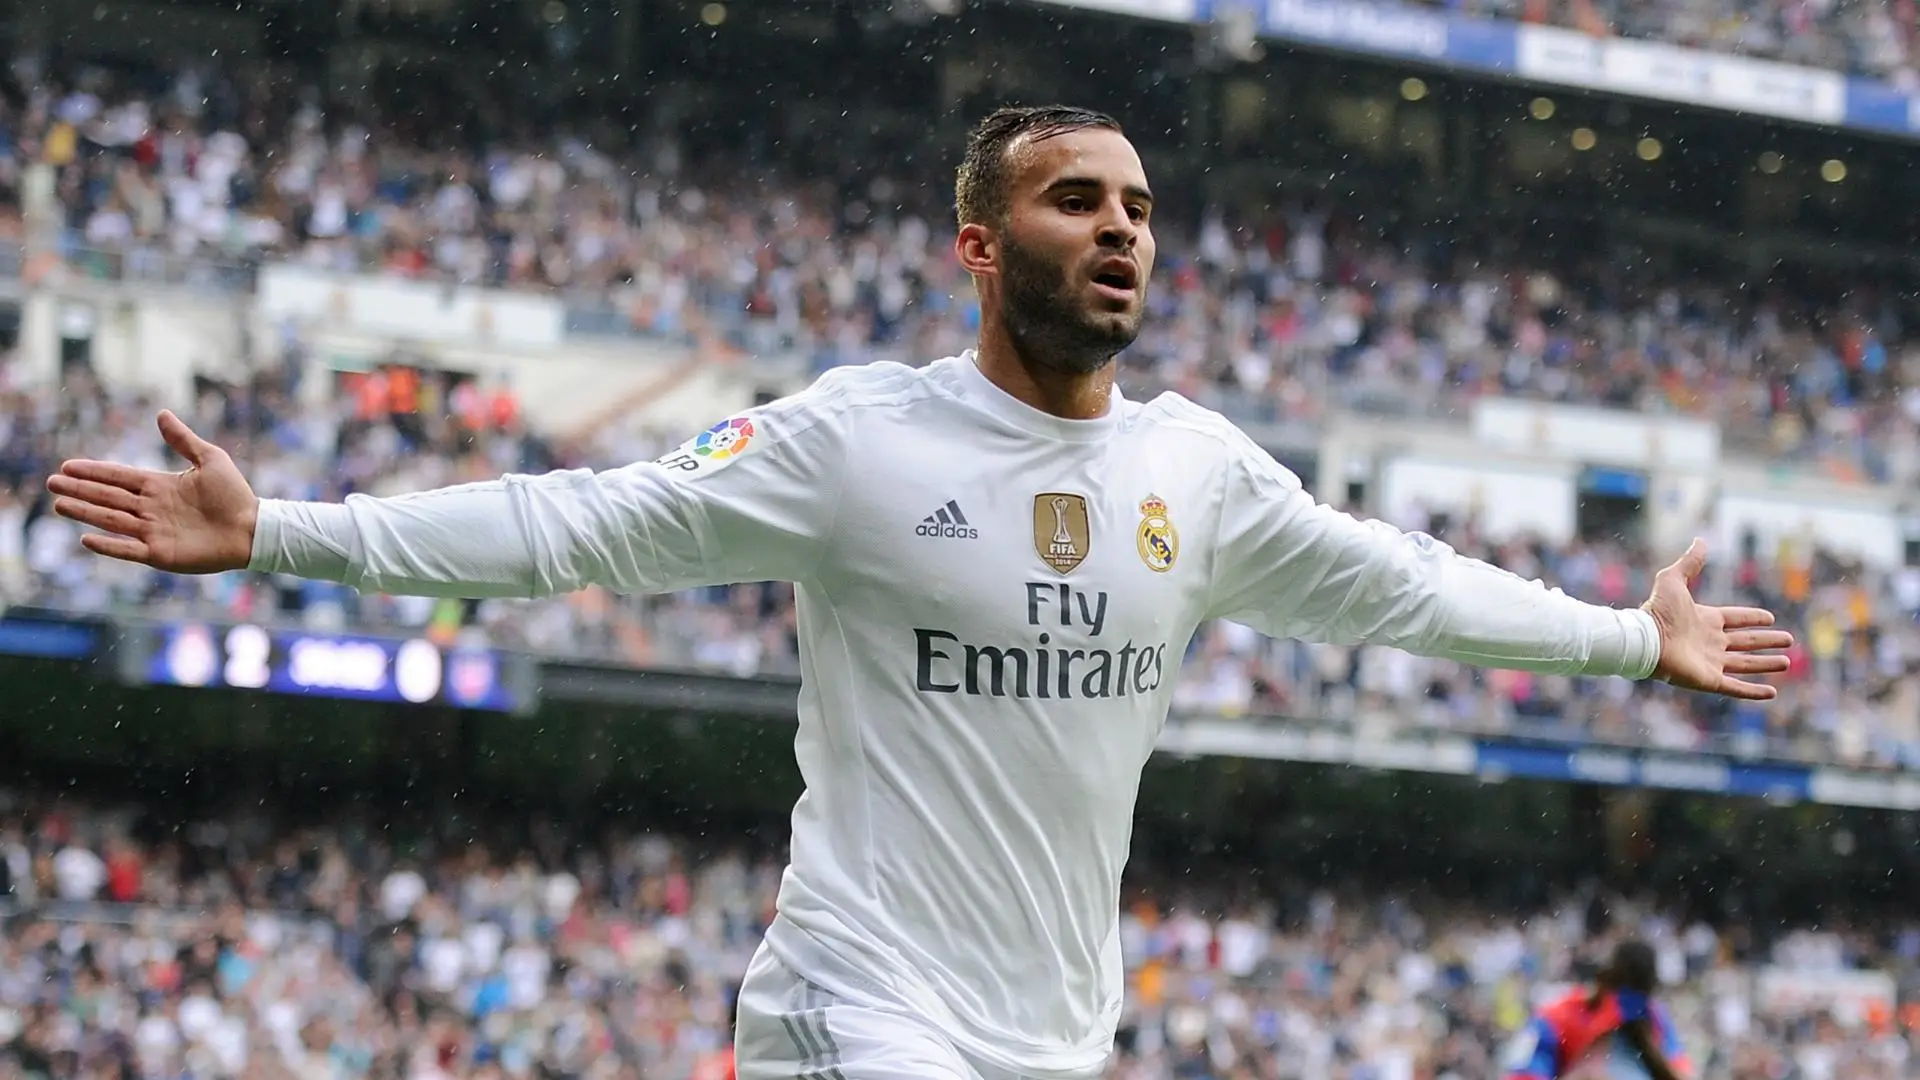 Ex-Real Madrid Castilla members reveal Jese once refused to play with different jersey No.